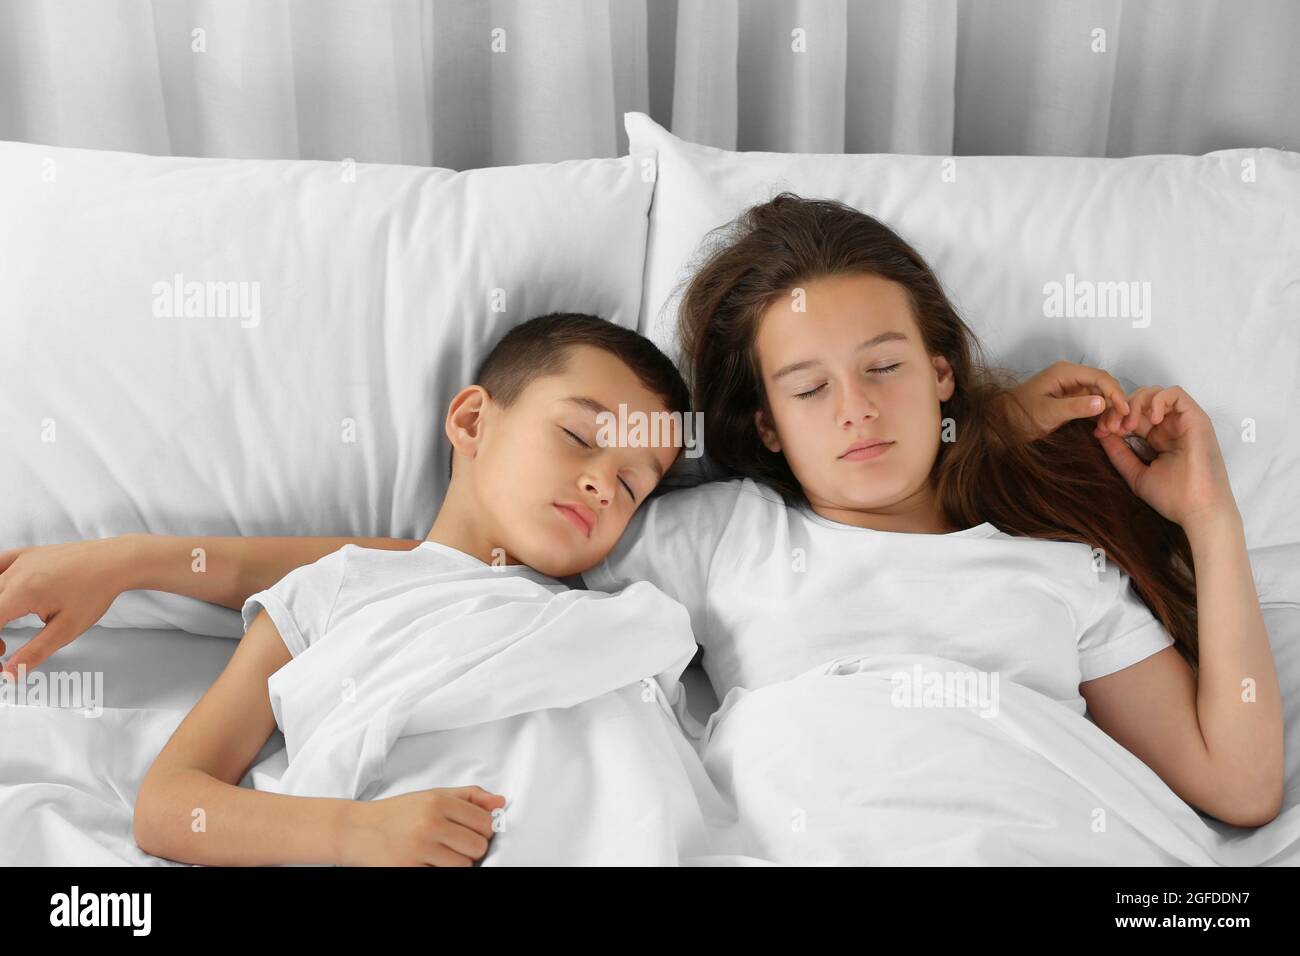 Brother and sister sleeping in bed Stock Photo Adult Picture